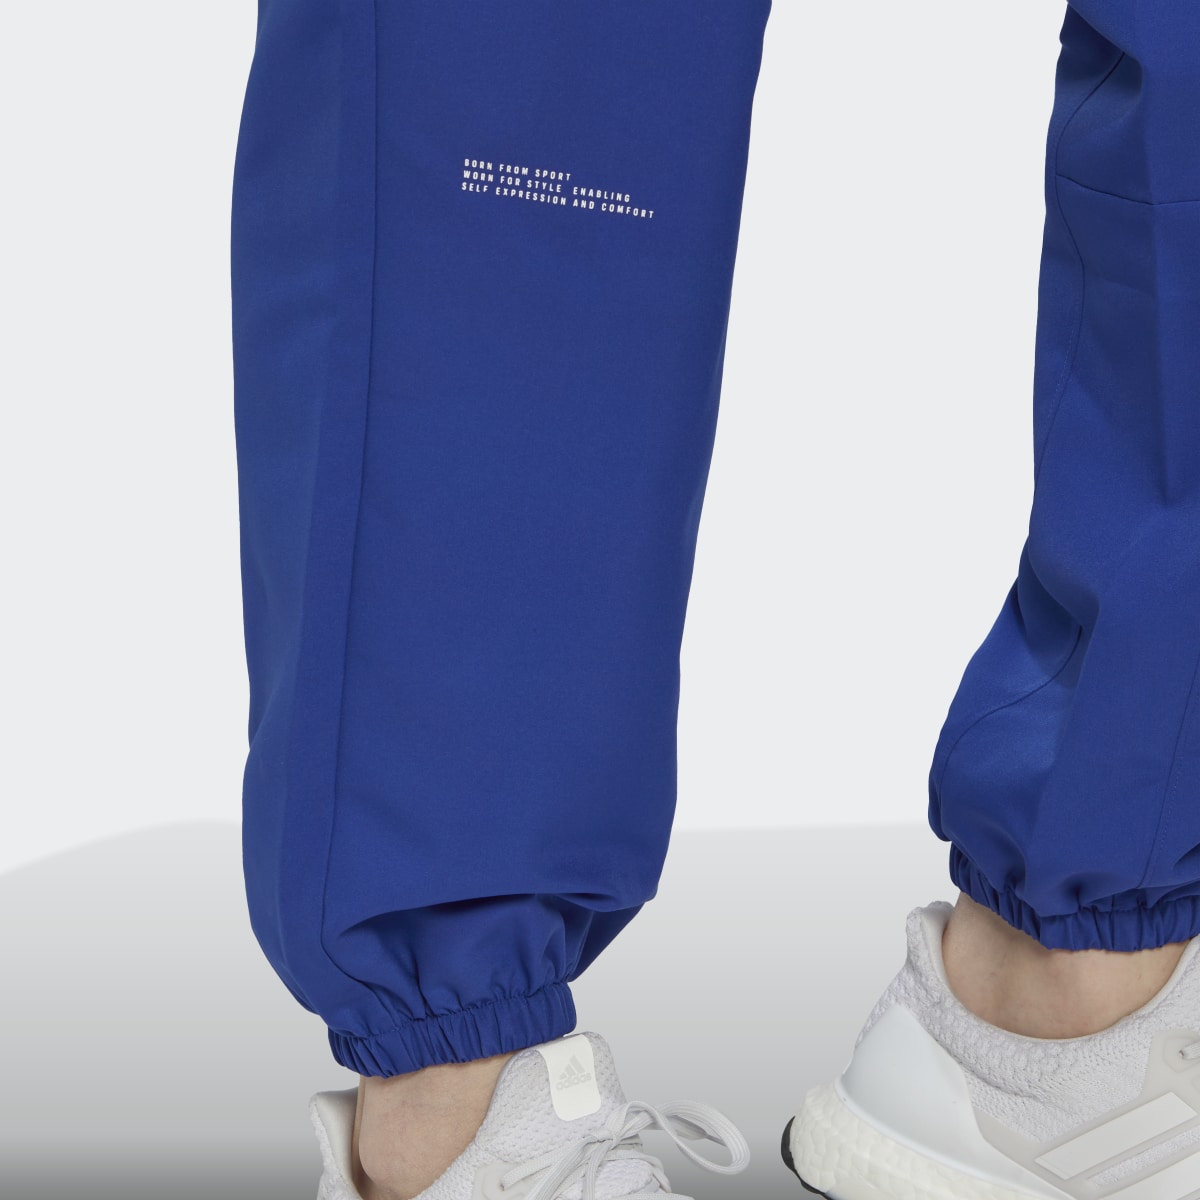 Adidas Woven Tracksuit Bottoms. 6